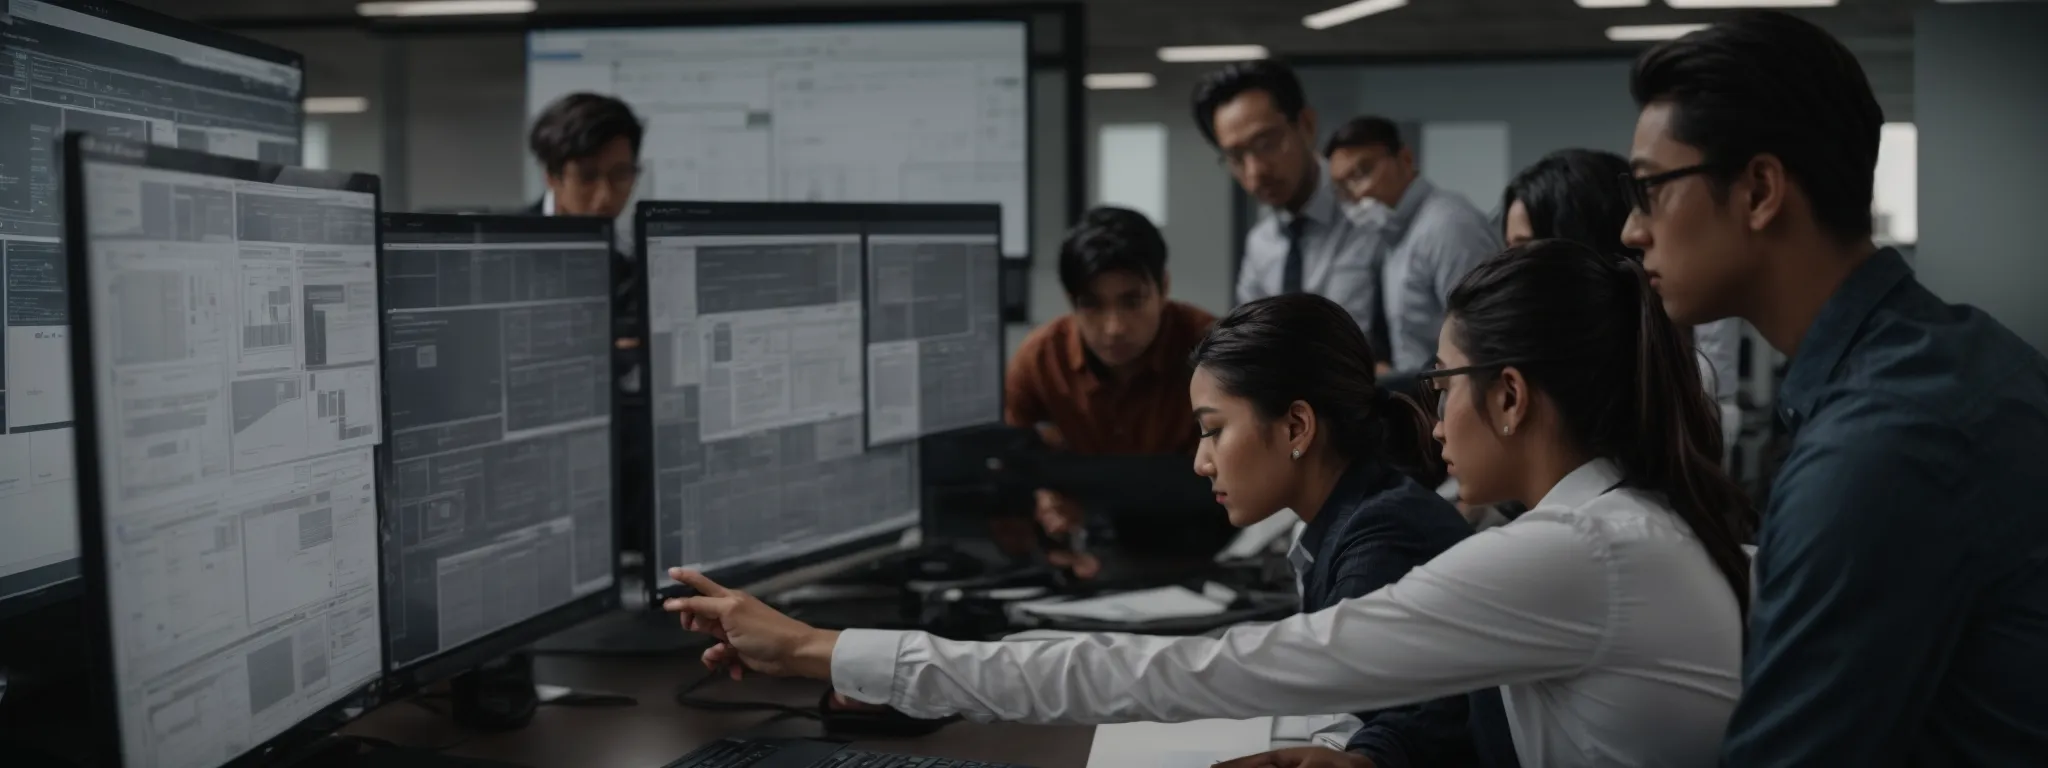 a professional team reviews wireframes and design layouts on a computer screen in a modern office environment.